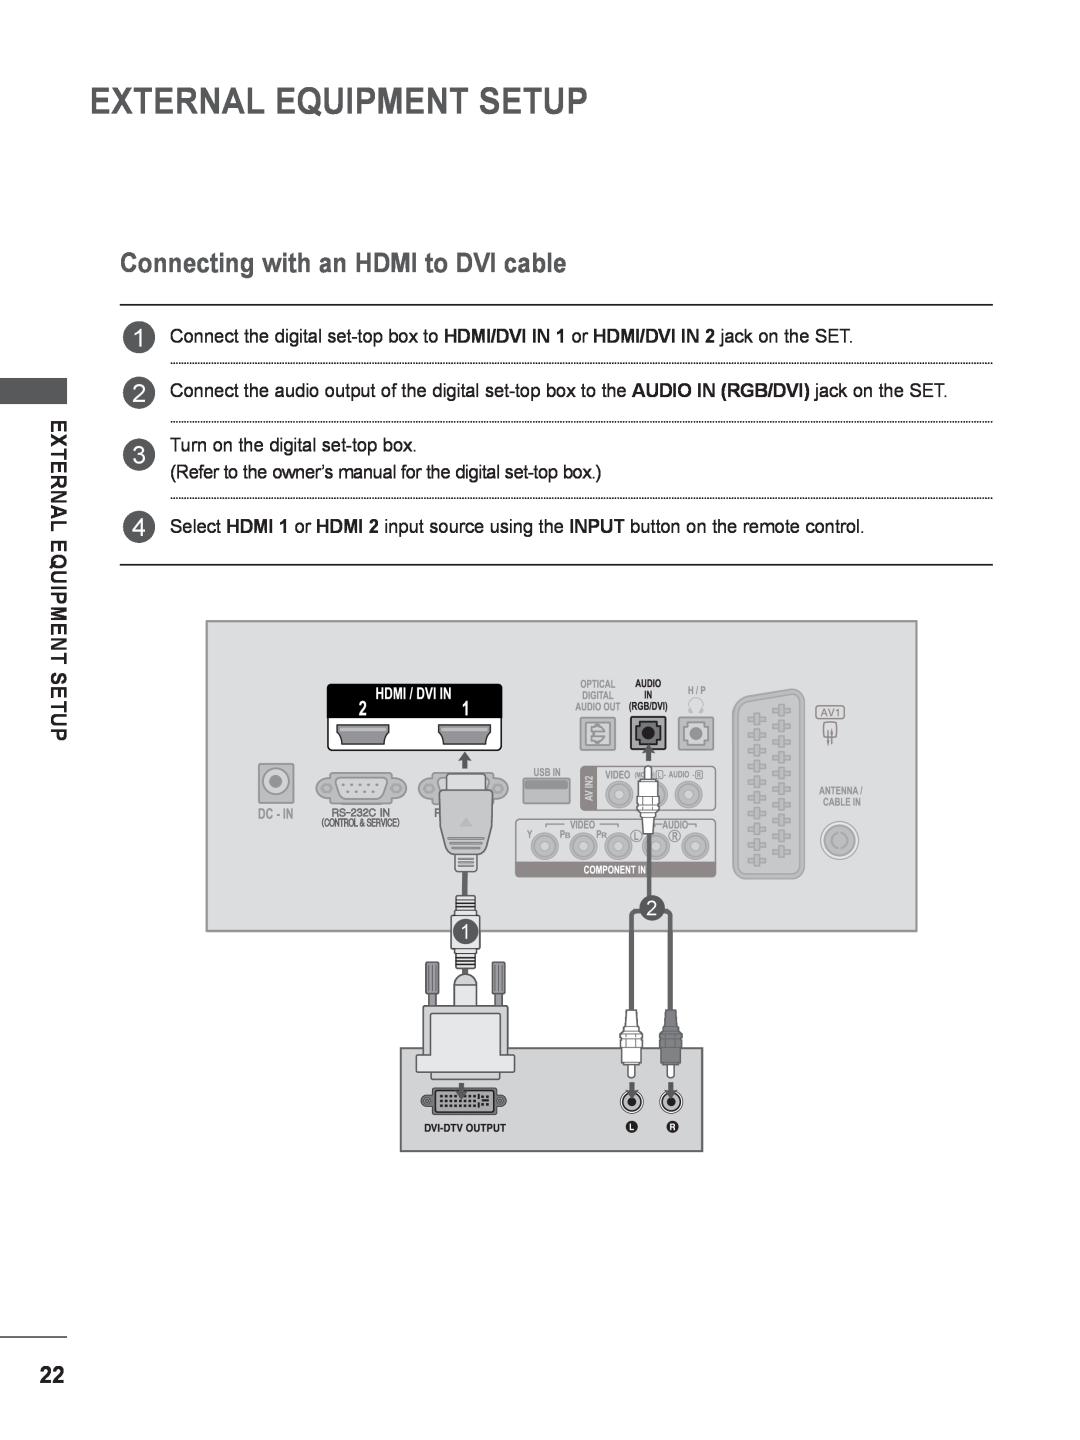 LG Electronics M2280D, M2780DF, M2780DN, M2380DN, M2380DB Connecting with an HDMI to DVI cable, External Equipment Setup 